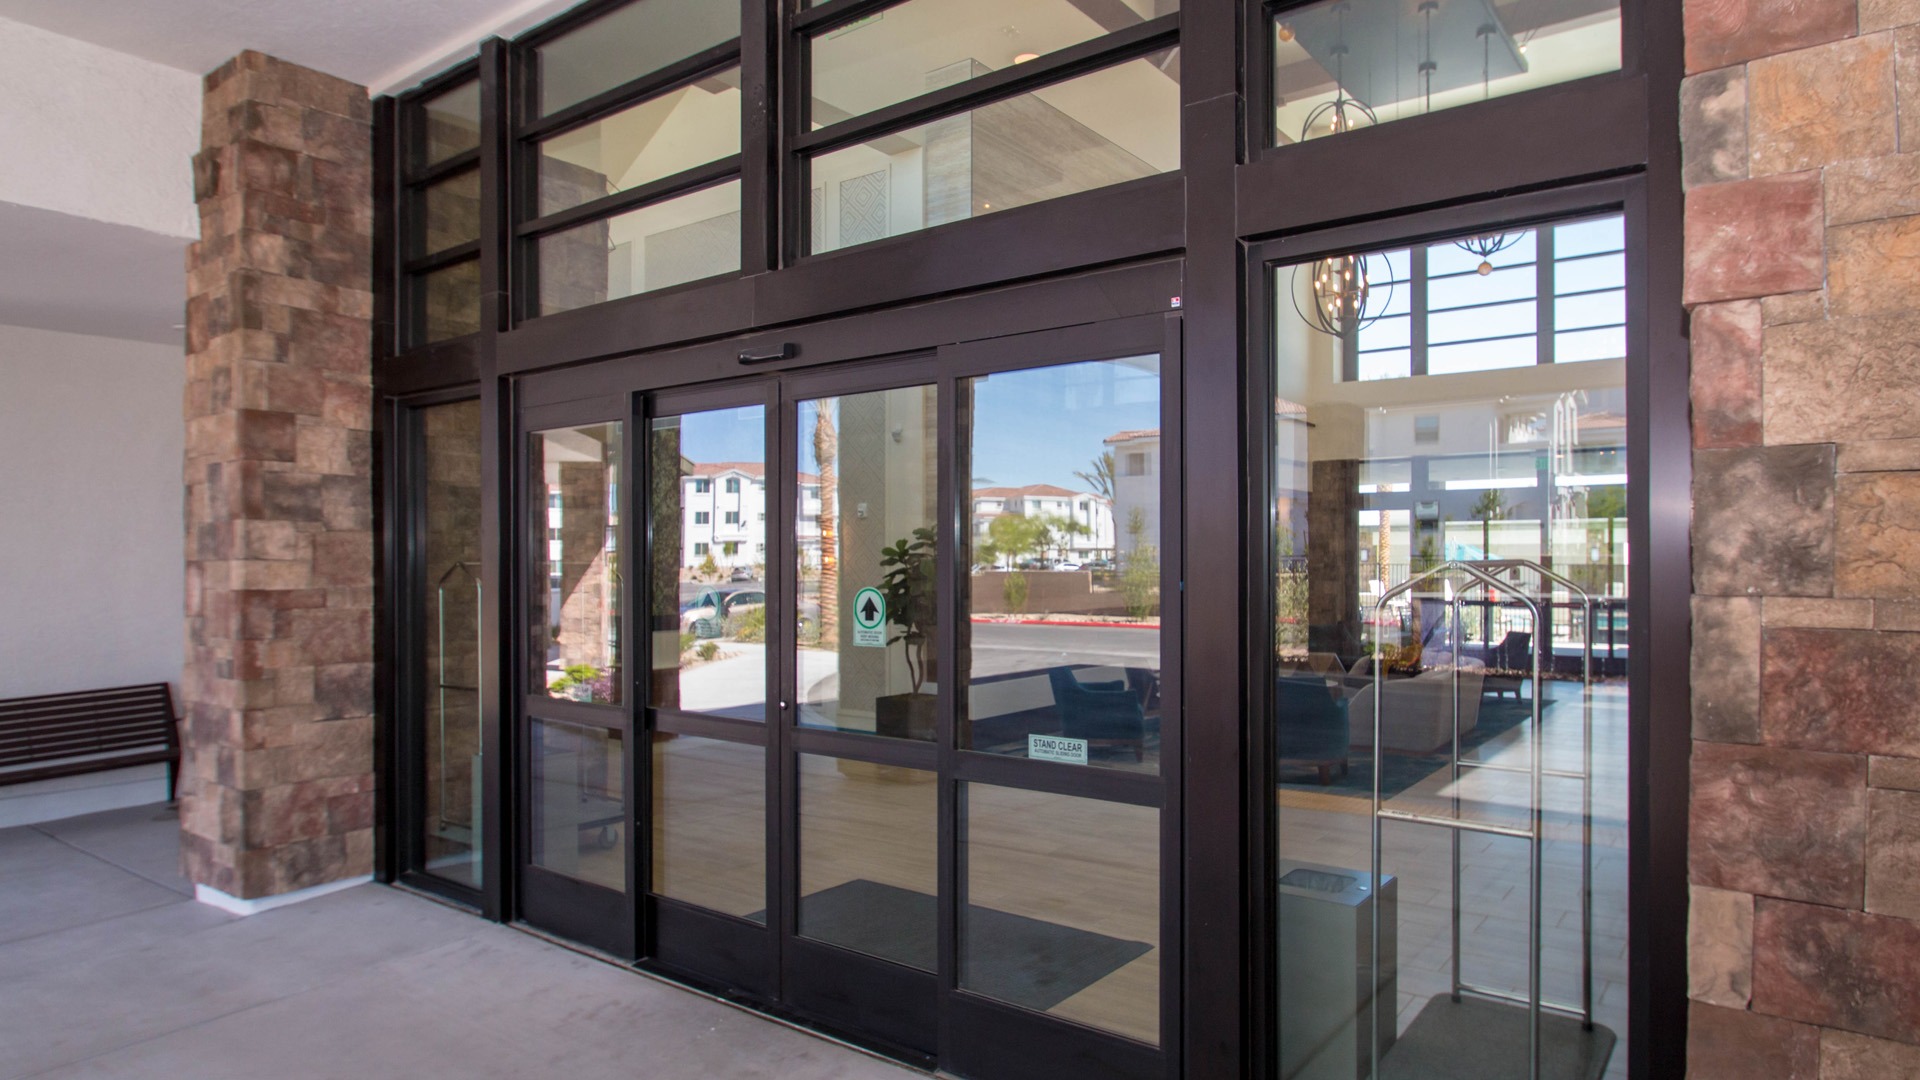 Brown aluminum commercial windows near hotel entry